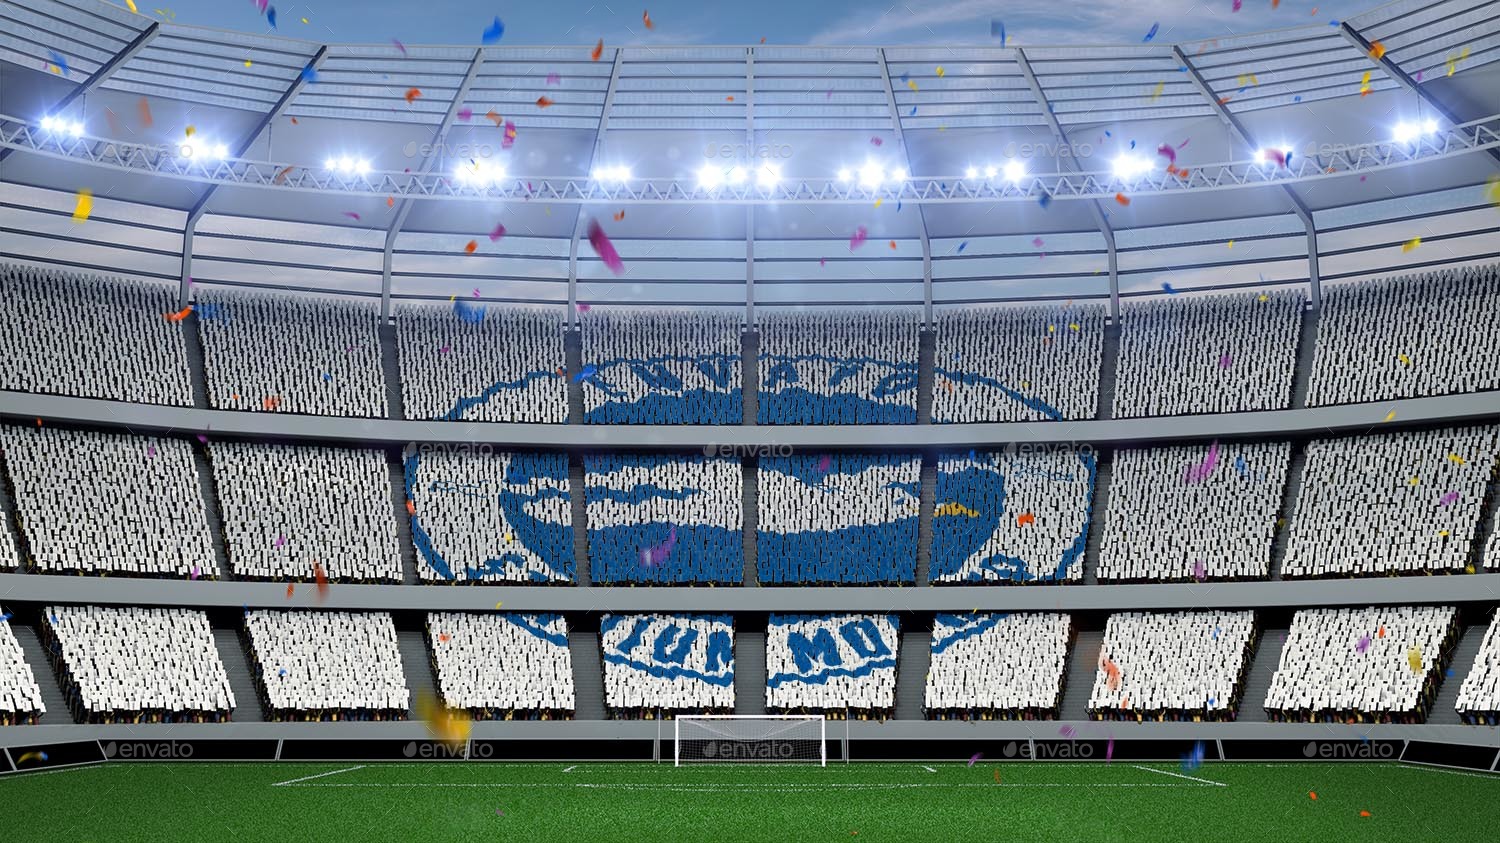 Download Football Stadium Fans Banners Mockup By Sidrockz44 Graphicriver